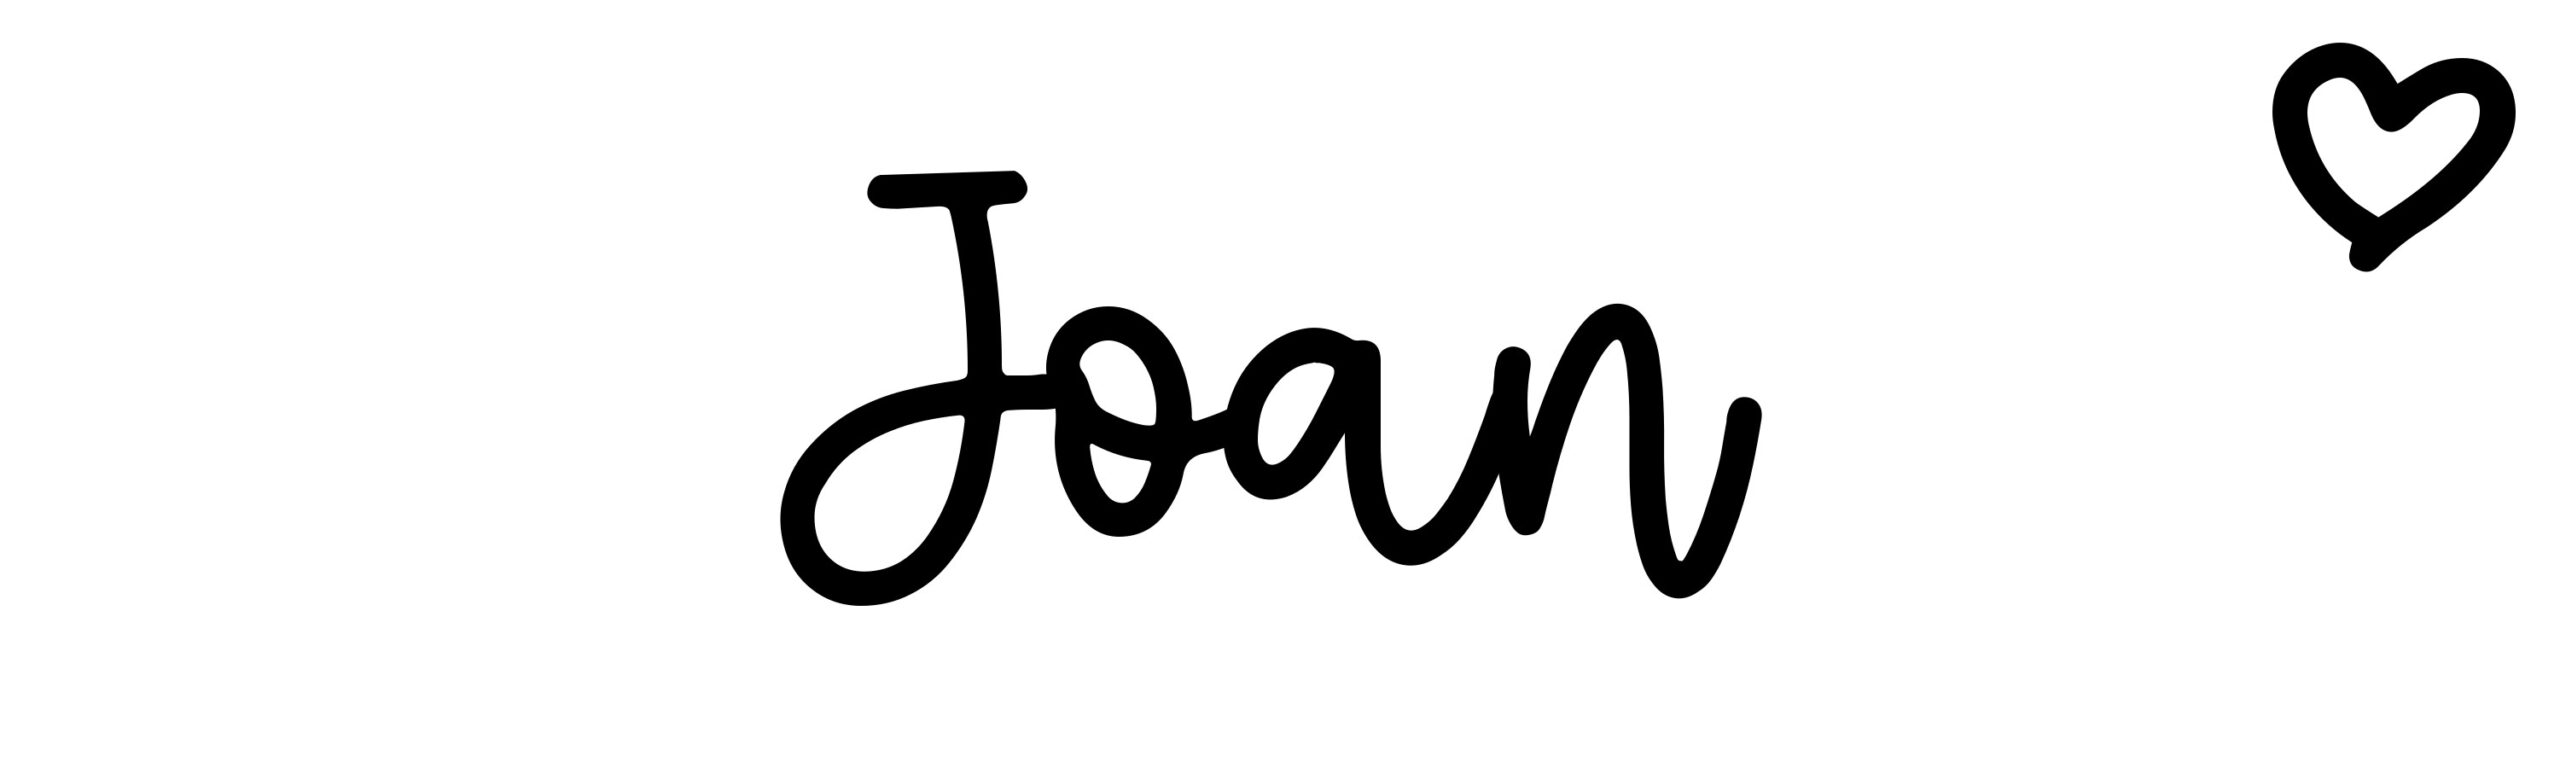 Joan - Name meaning, origin, variations and more